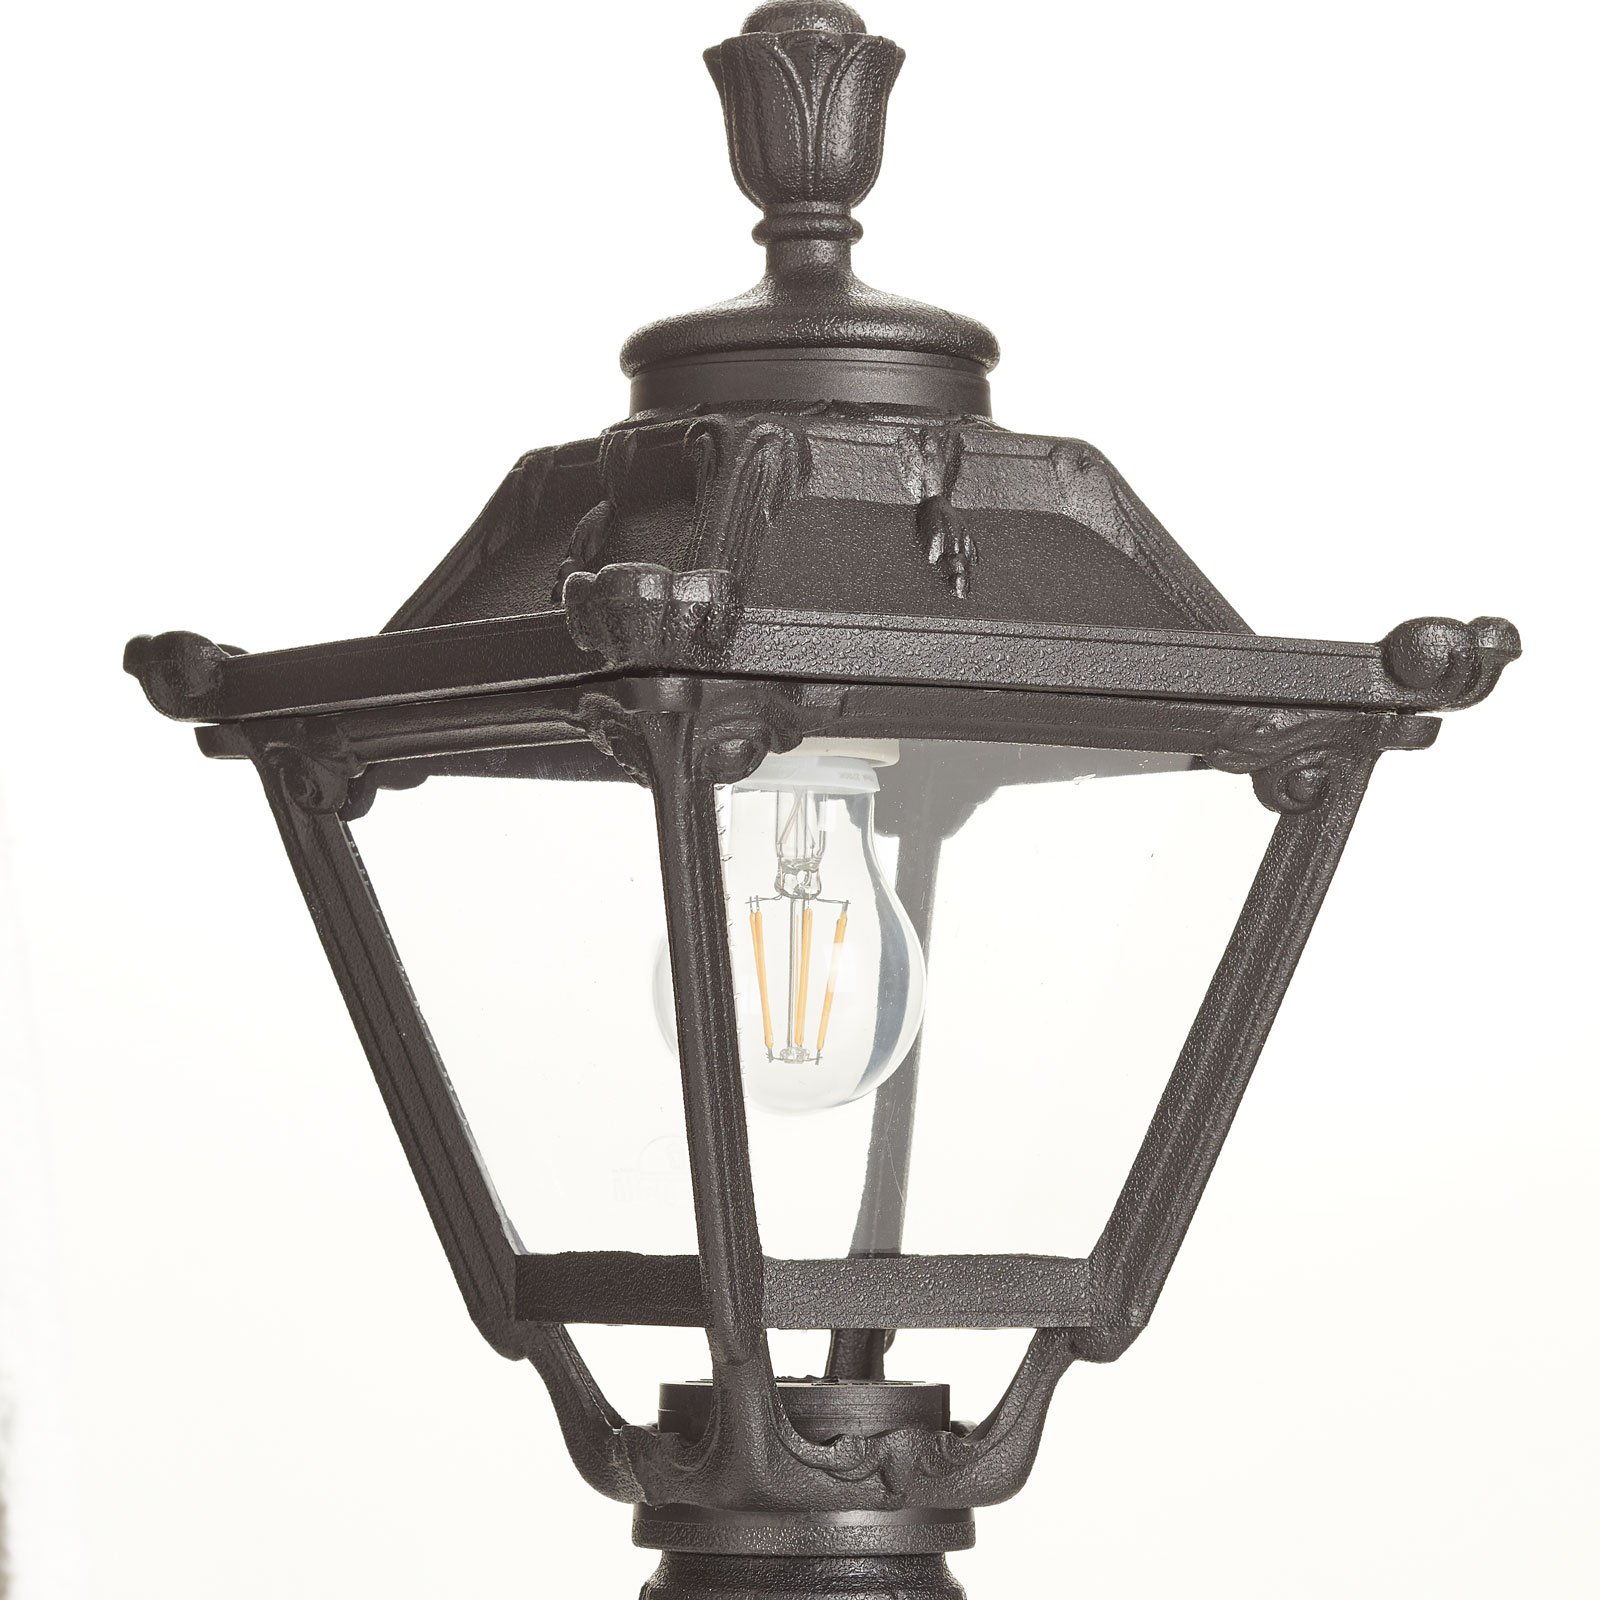 Golia wall lantern for outdoors black clear 2,700K